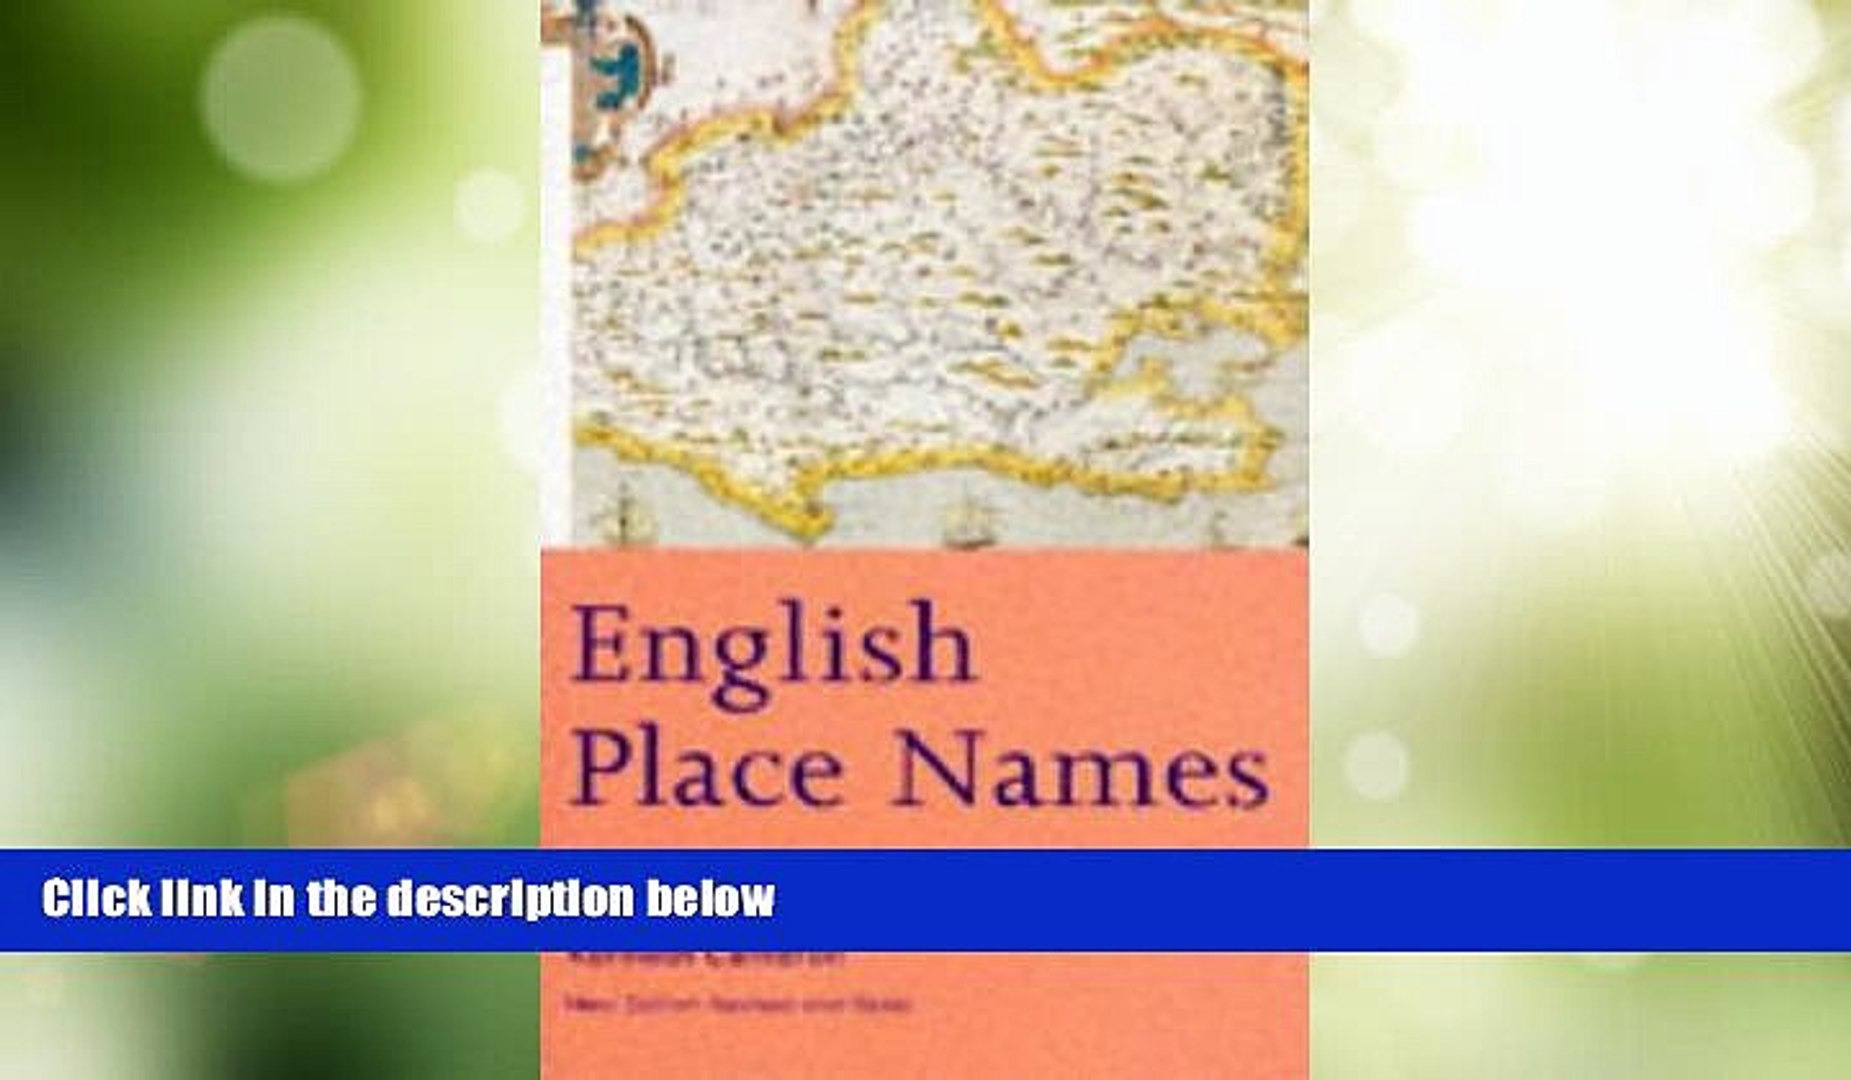 Big Sales  English Place Names (English Heritage)  Premium Ebooks Best Seller in USA